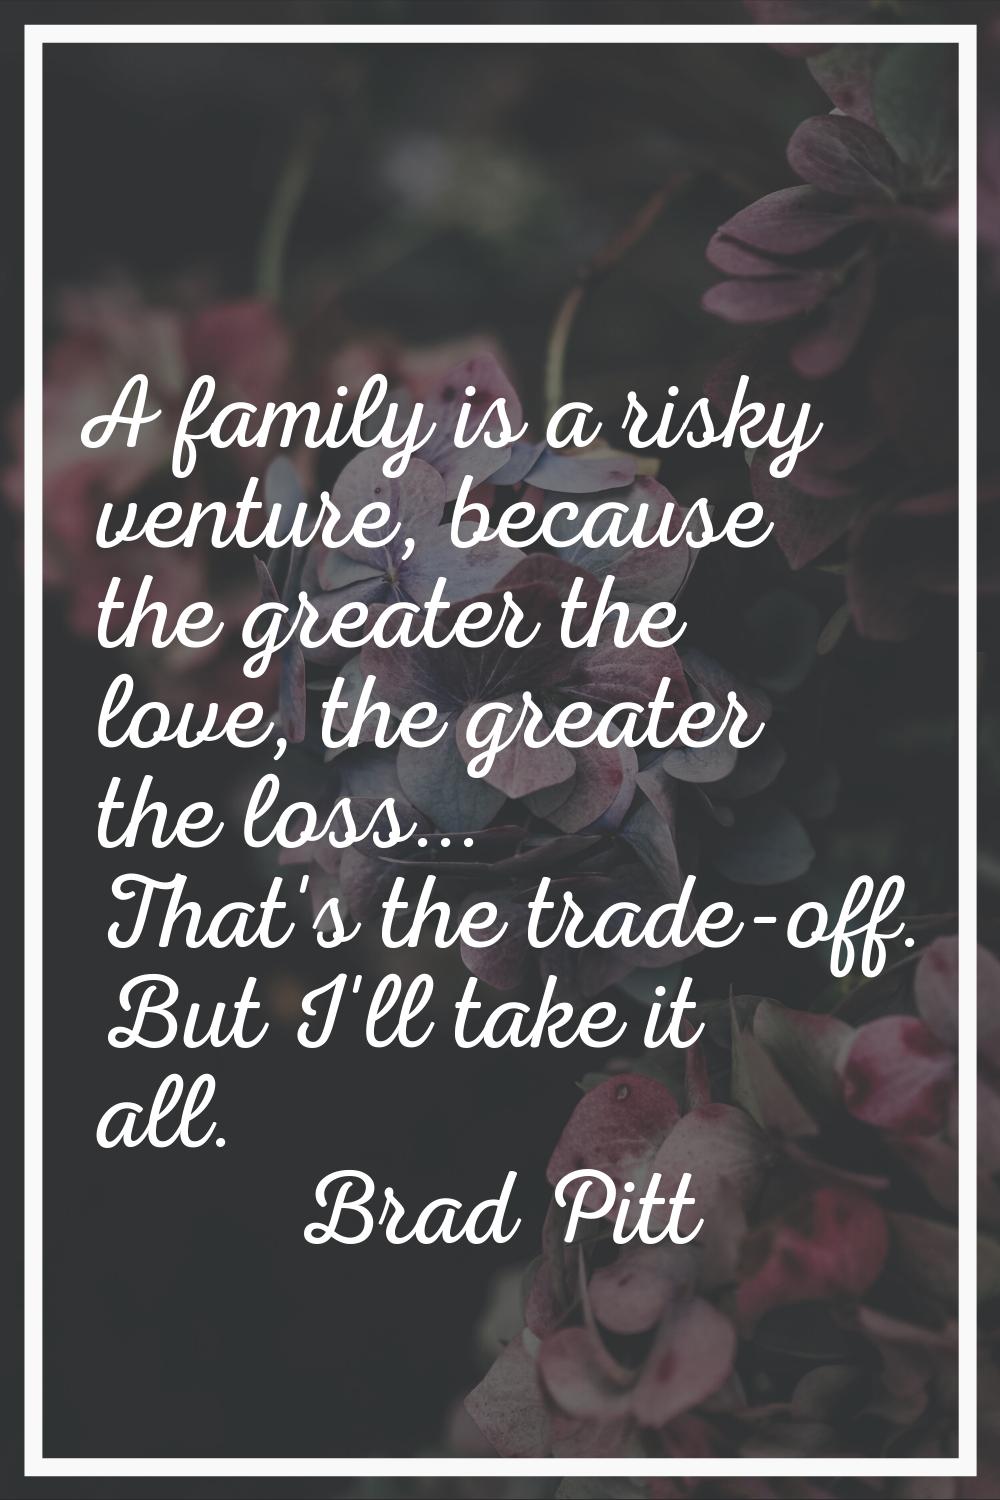 A family is a risky venture, because the greater the love, the greater the loss... That's the trade